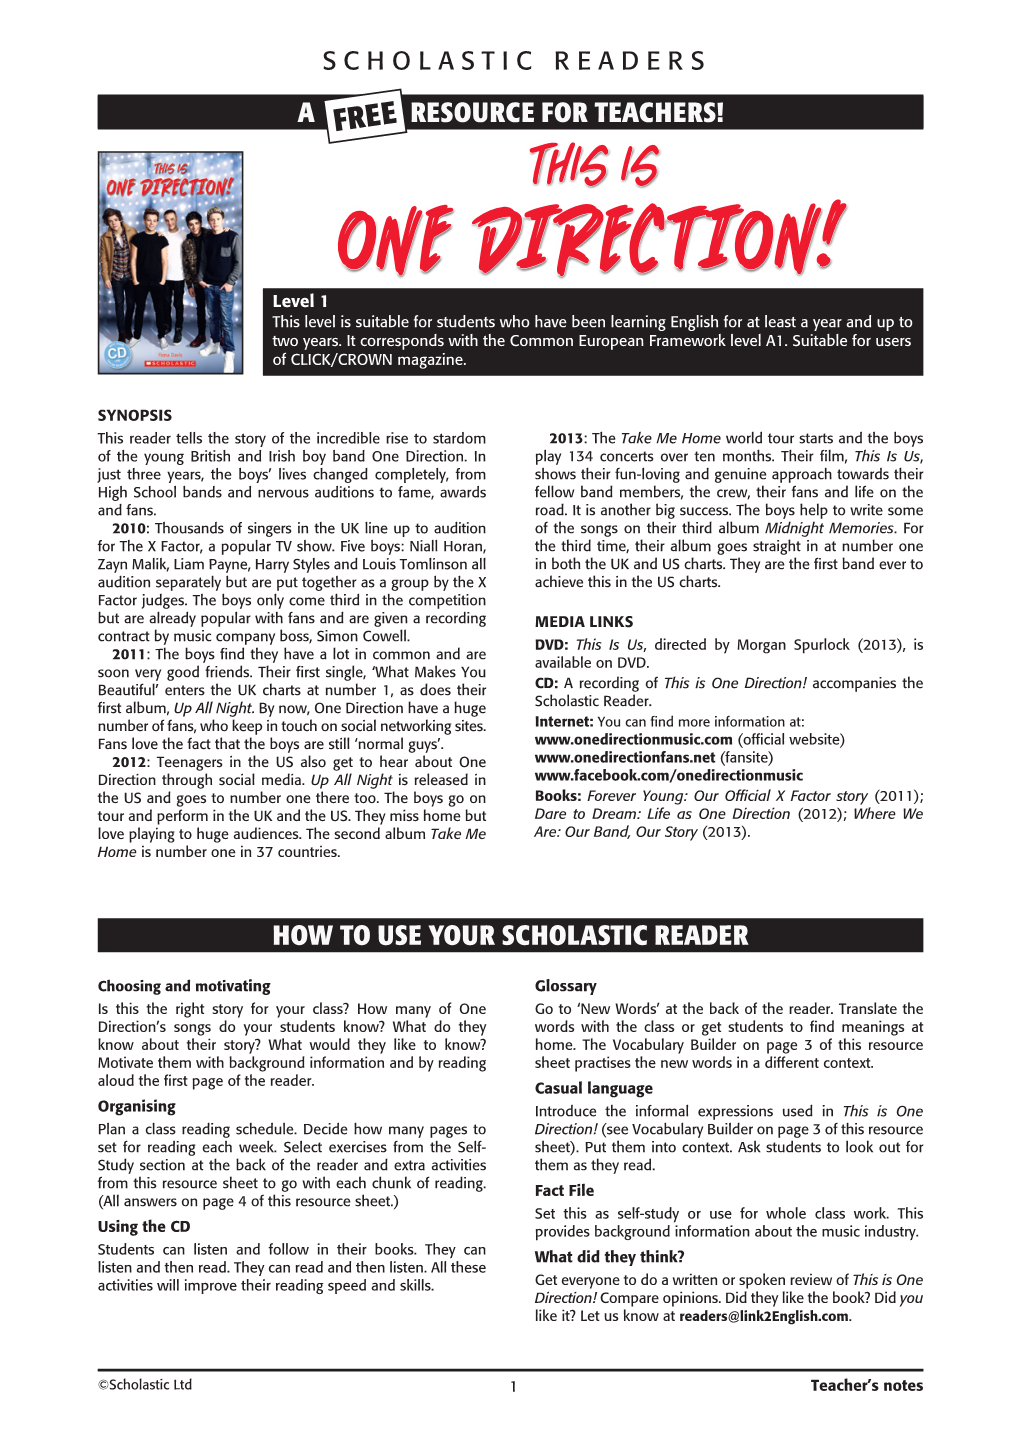 ONE DIRECTION! Level 1 This Level Is Suitable for Students Who Have Been Learning English for at Least a Year and up to Two Years